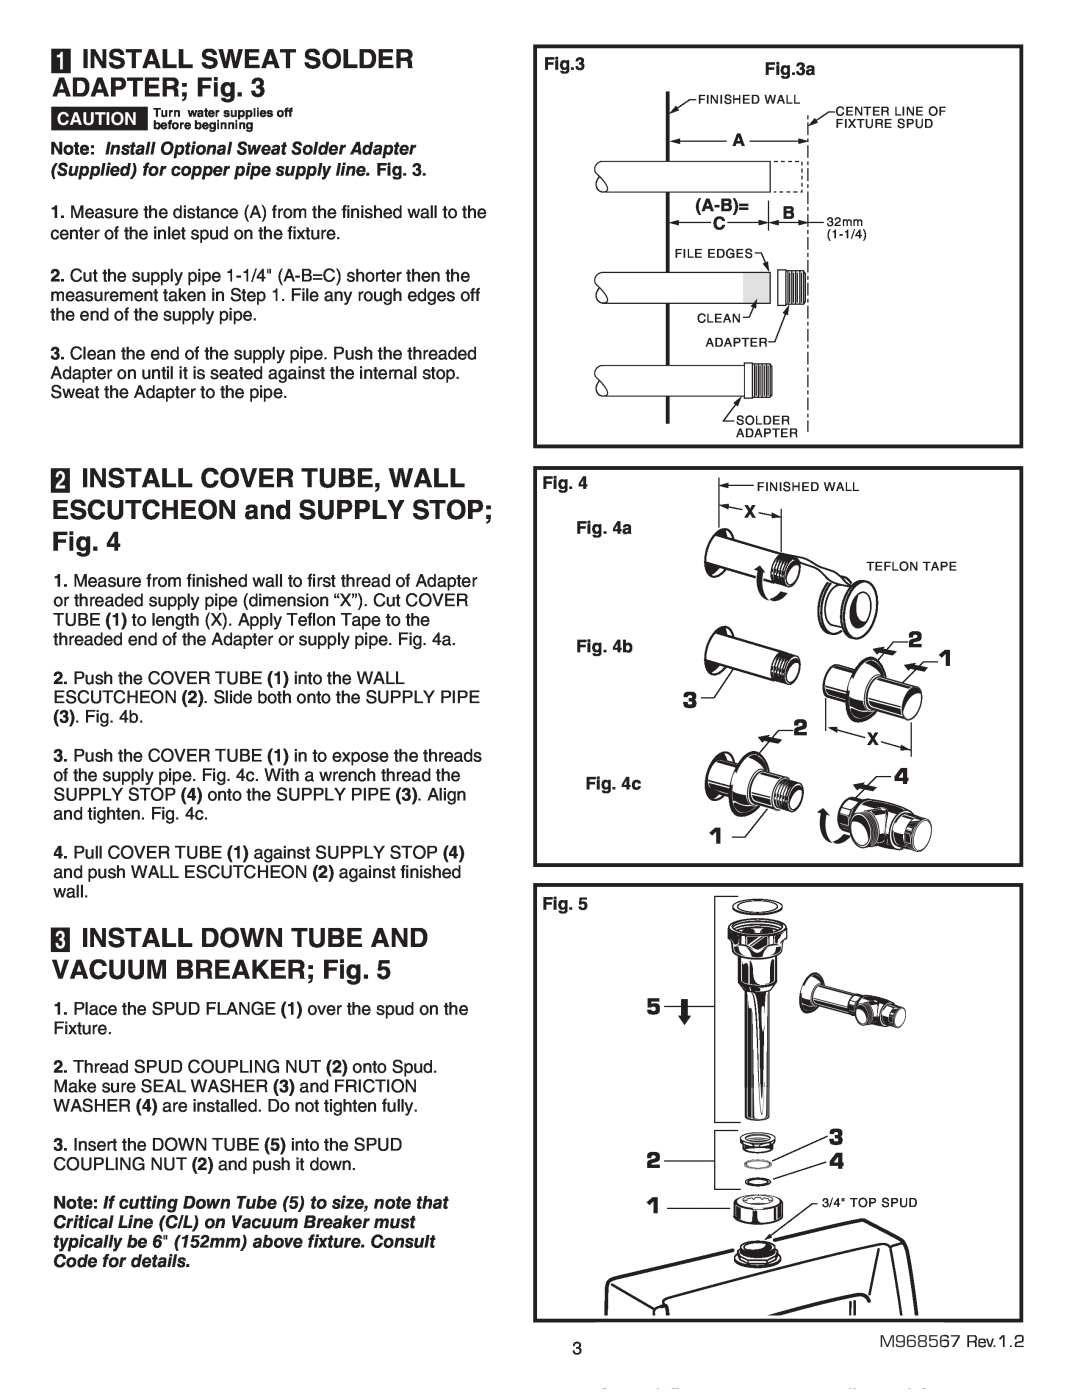 American Standard 6063.505 1INSTALL SWEAT SOLDER ADAPTER Fig, 2INSTALL COVER TUBE, WALL, ESCUTCHEON and SUPPLY STOP Fig 